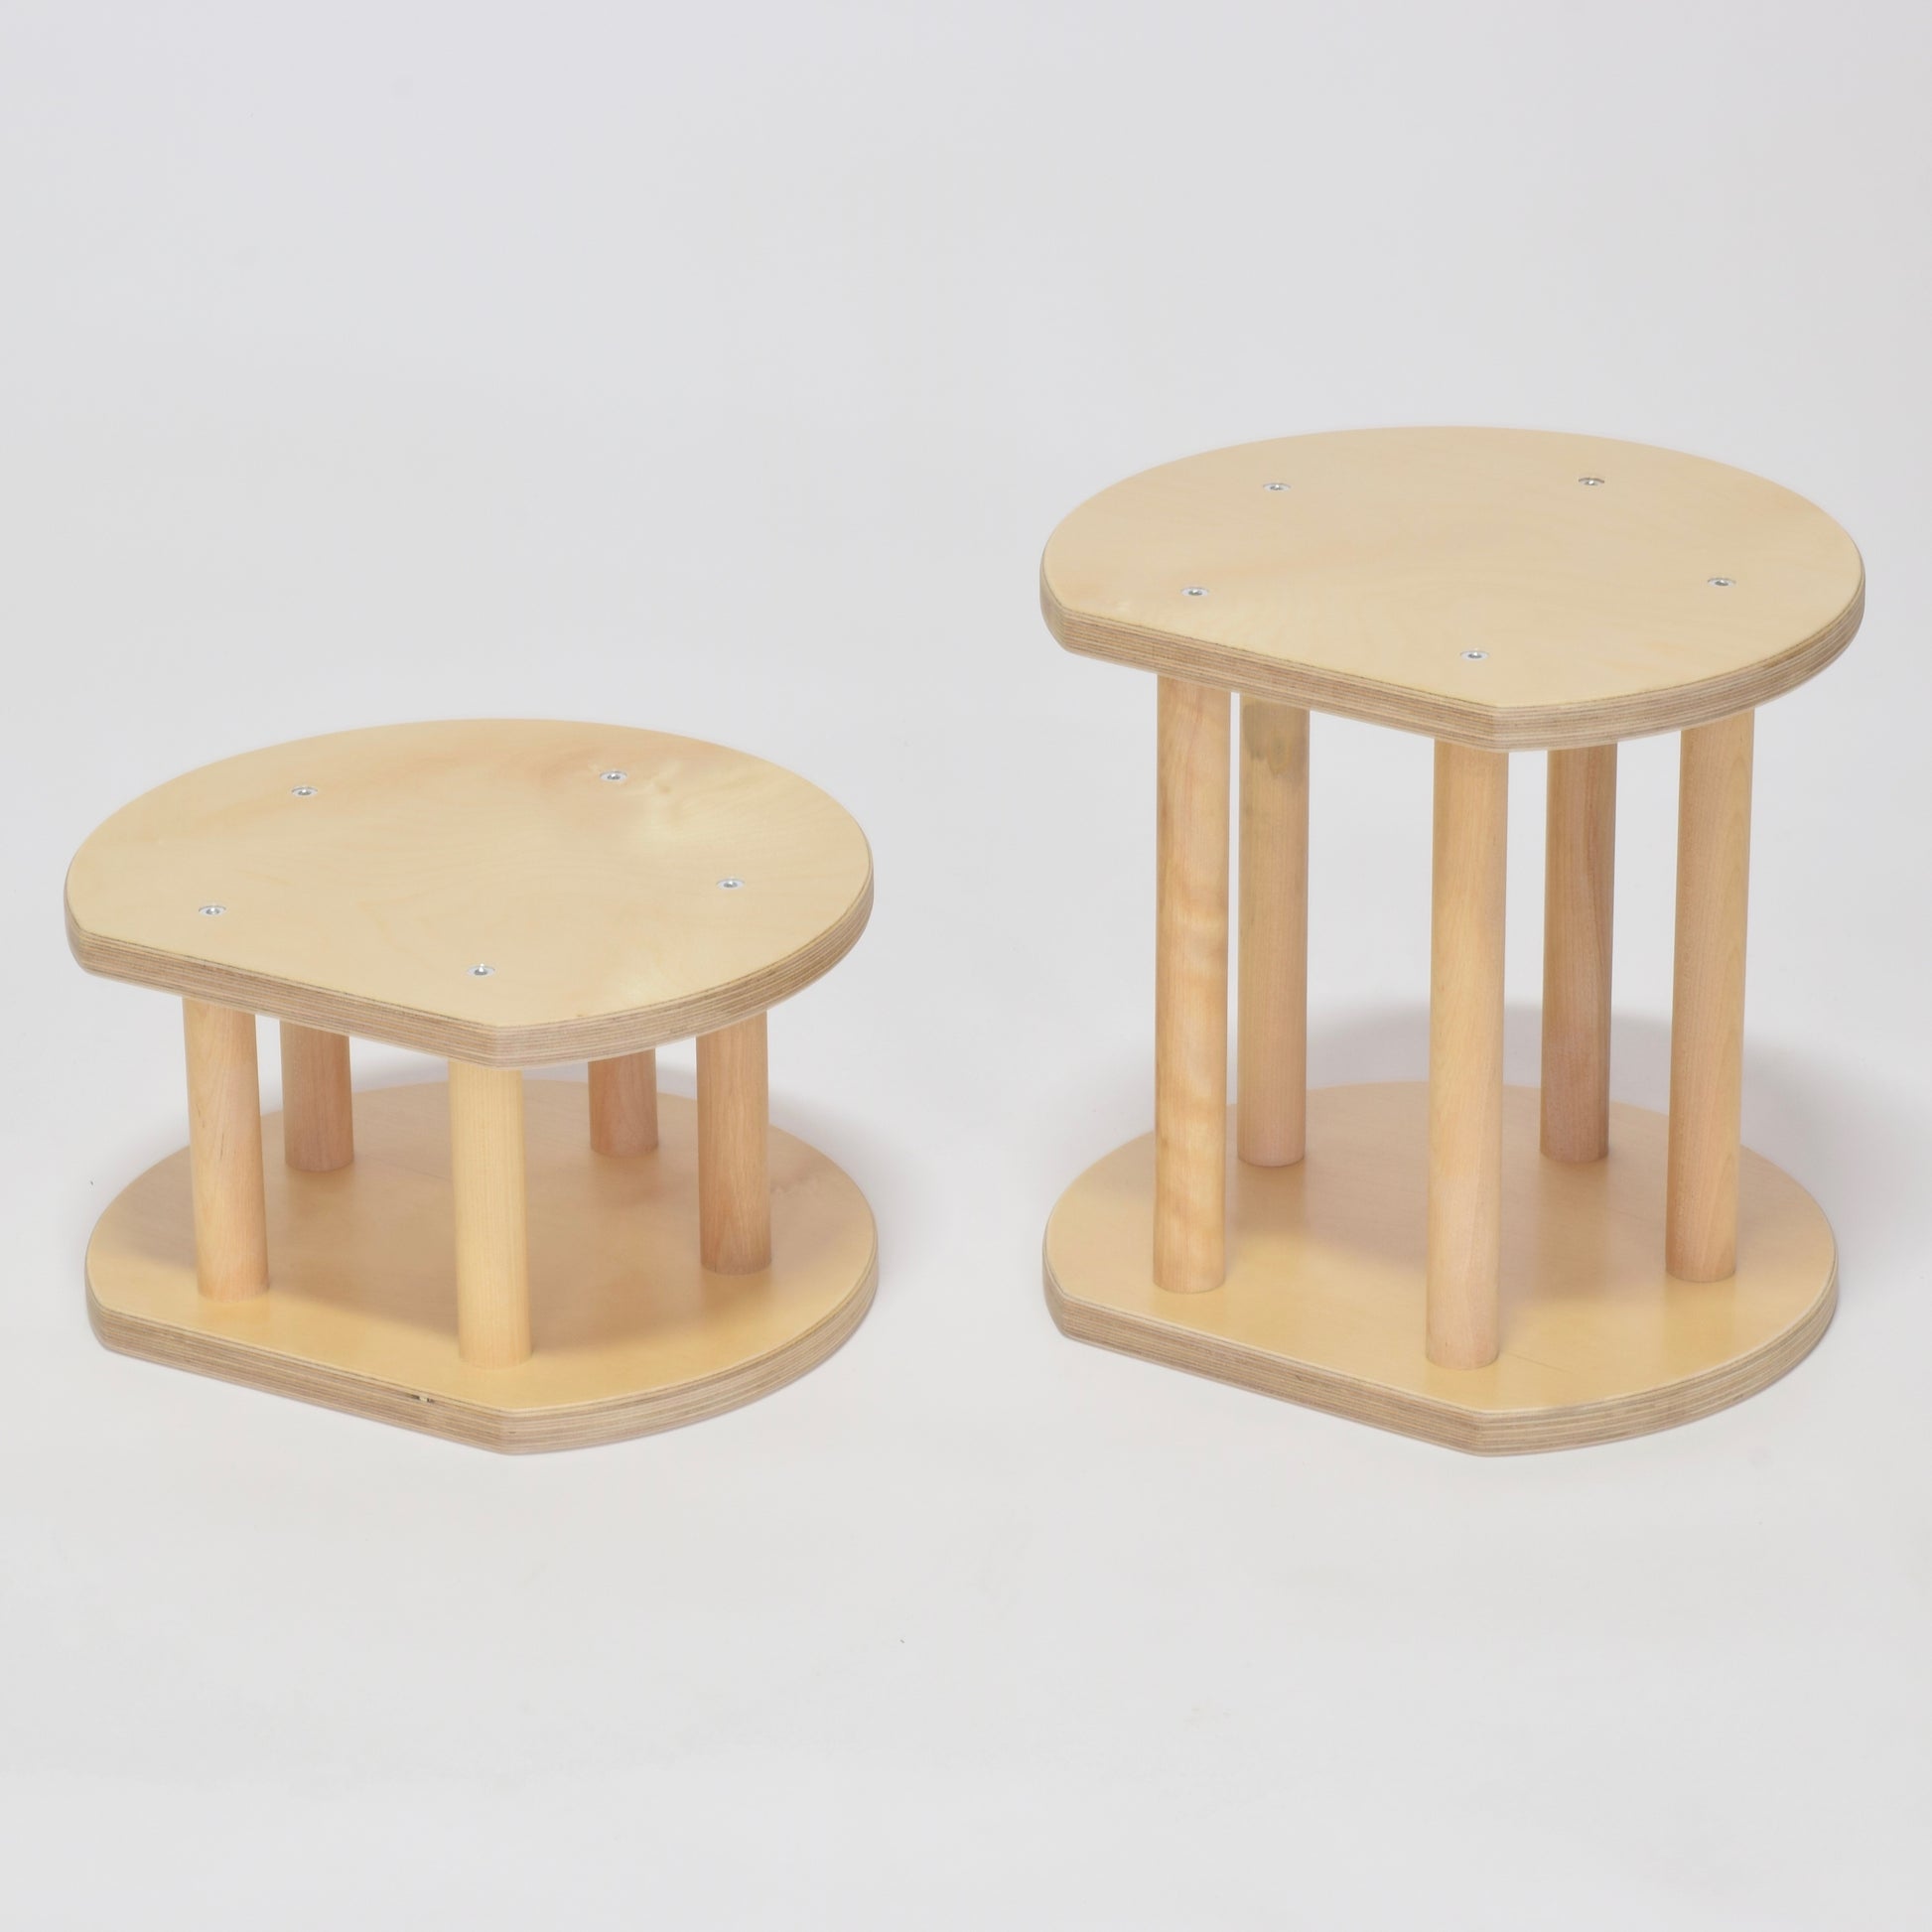 grow stool for toddlers